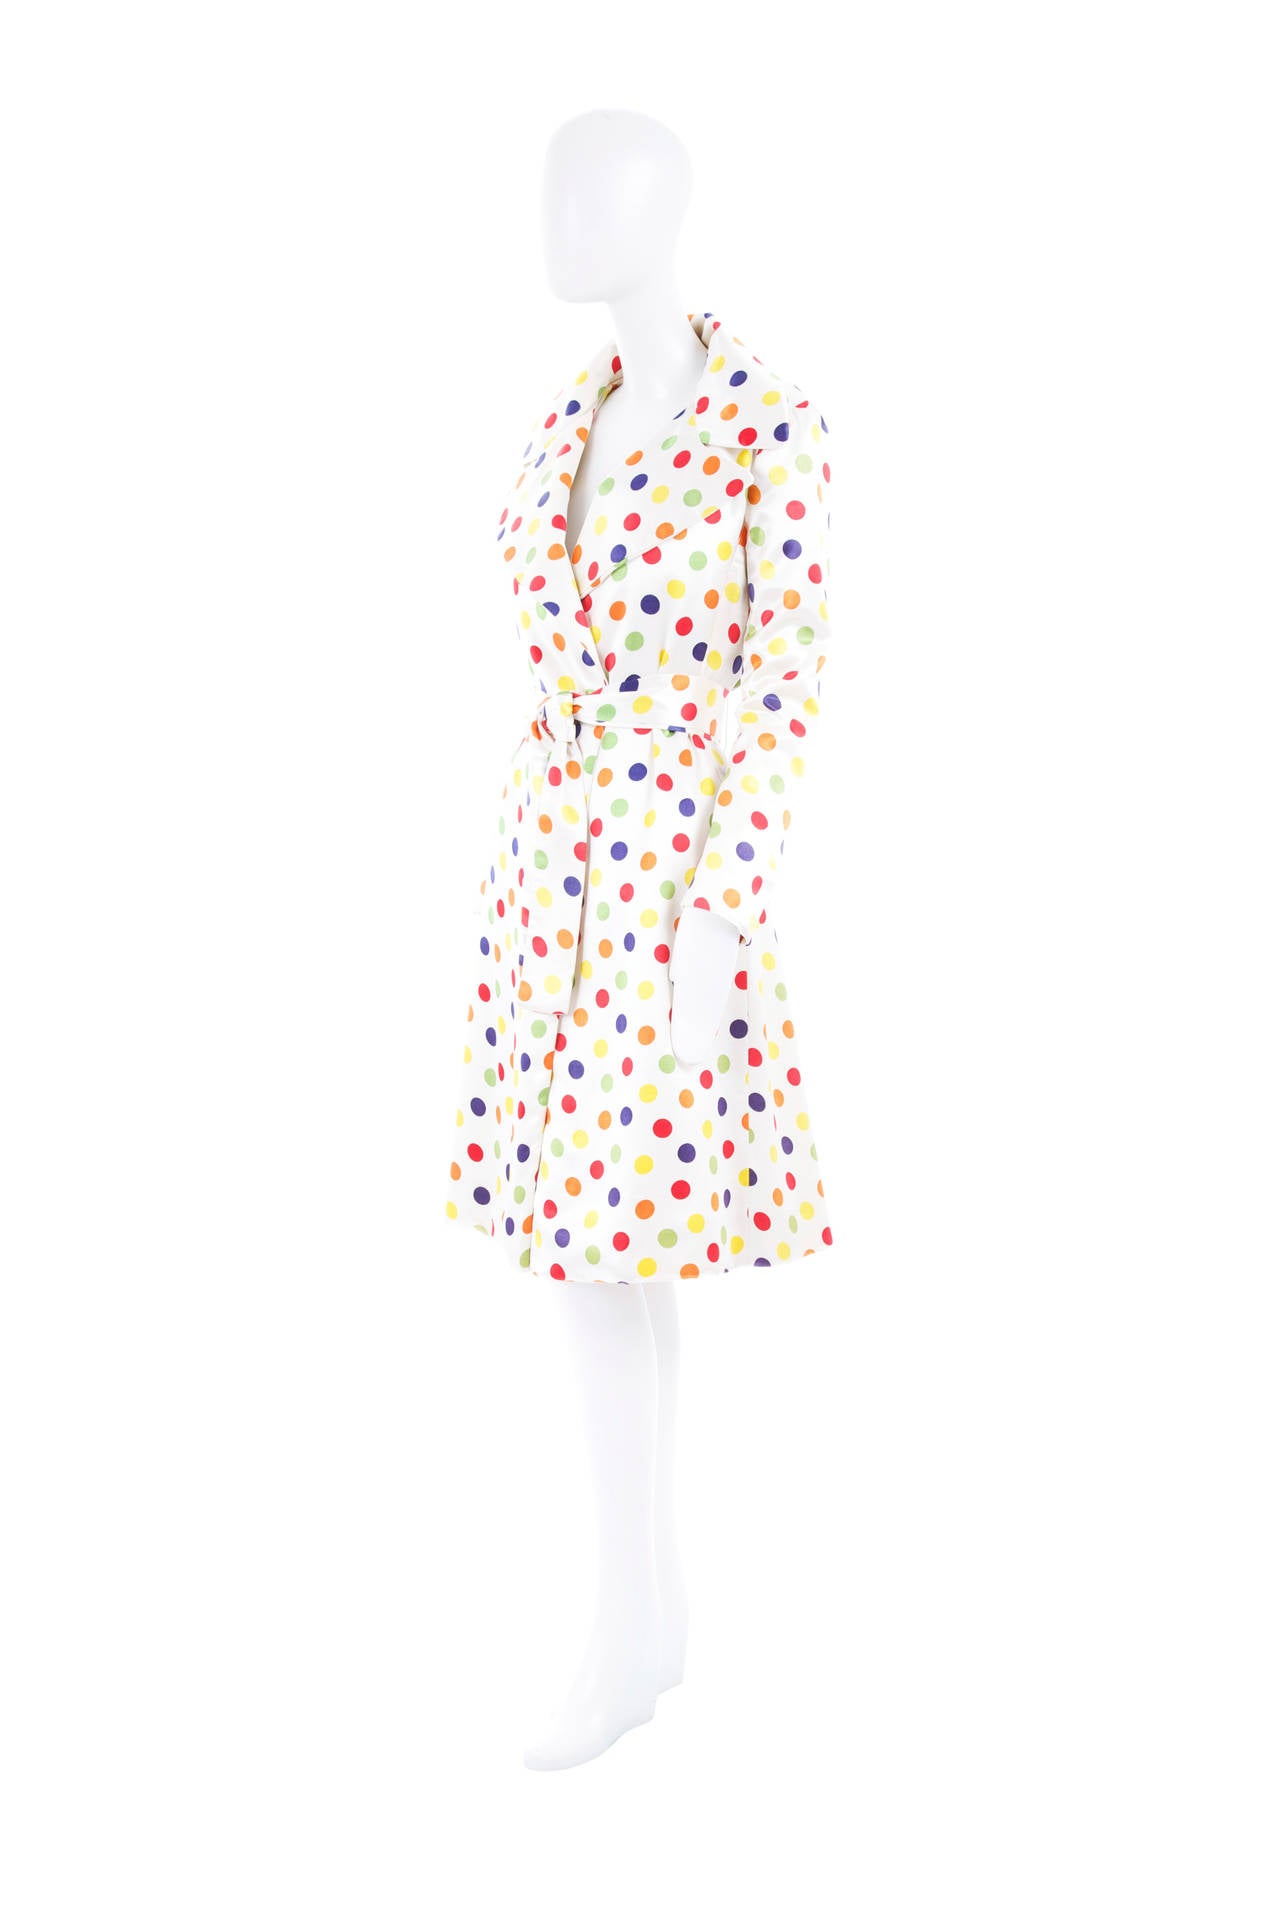 Fantastically fresh, this spring polka dot coat by Bill Blass is crafted in pure silk and will make a wonderful addition to the wardrobe. Beautifully cut, the coat features a wonderful on-trend wide lapel and is an upbeat way to wrap up, instantly